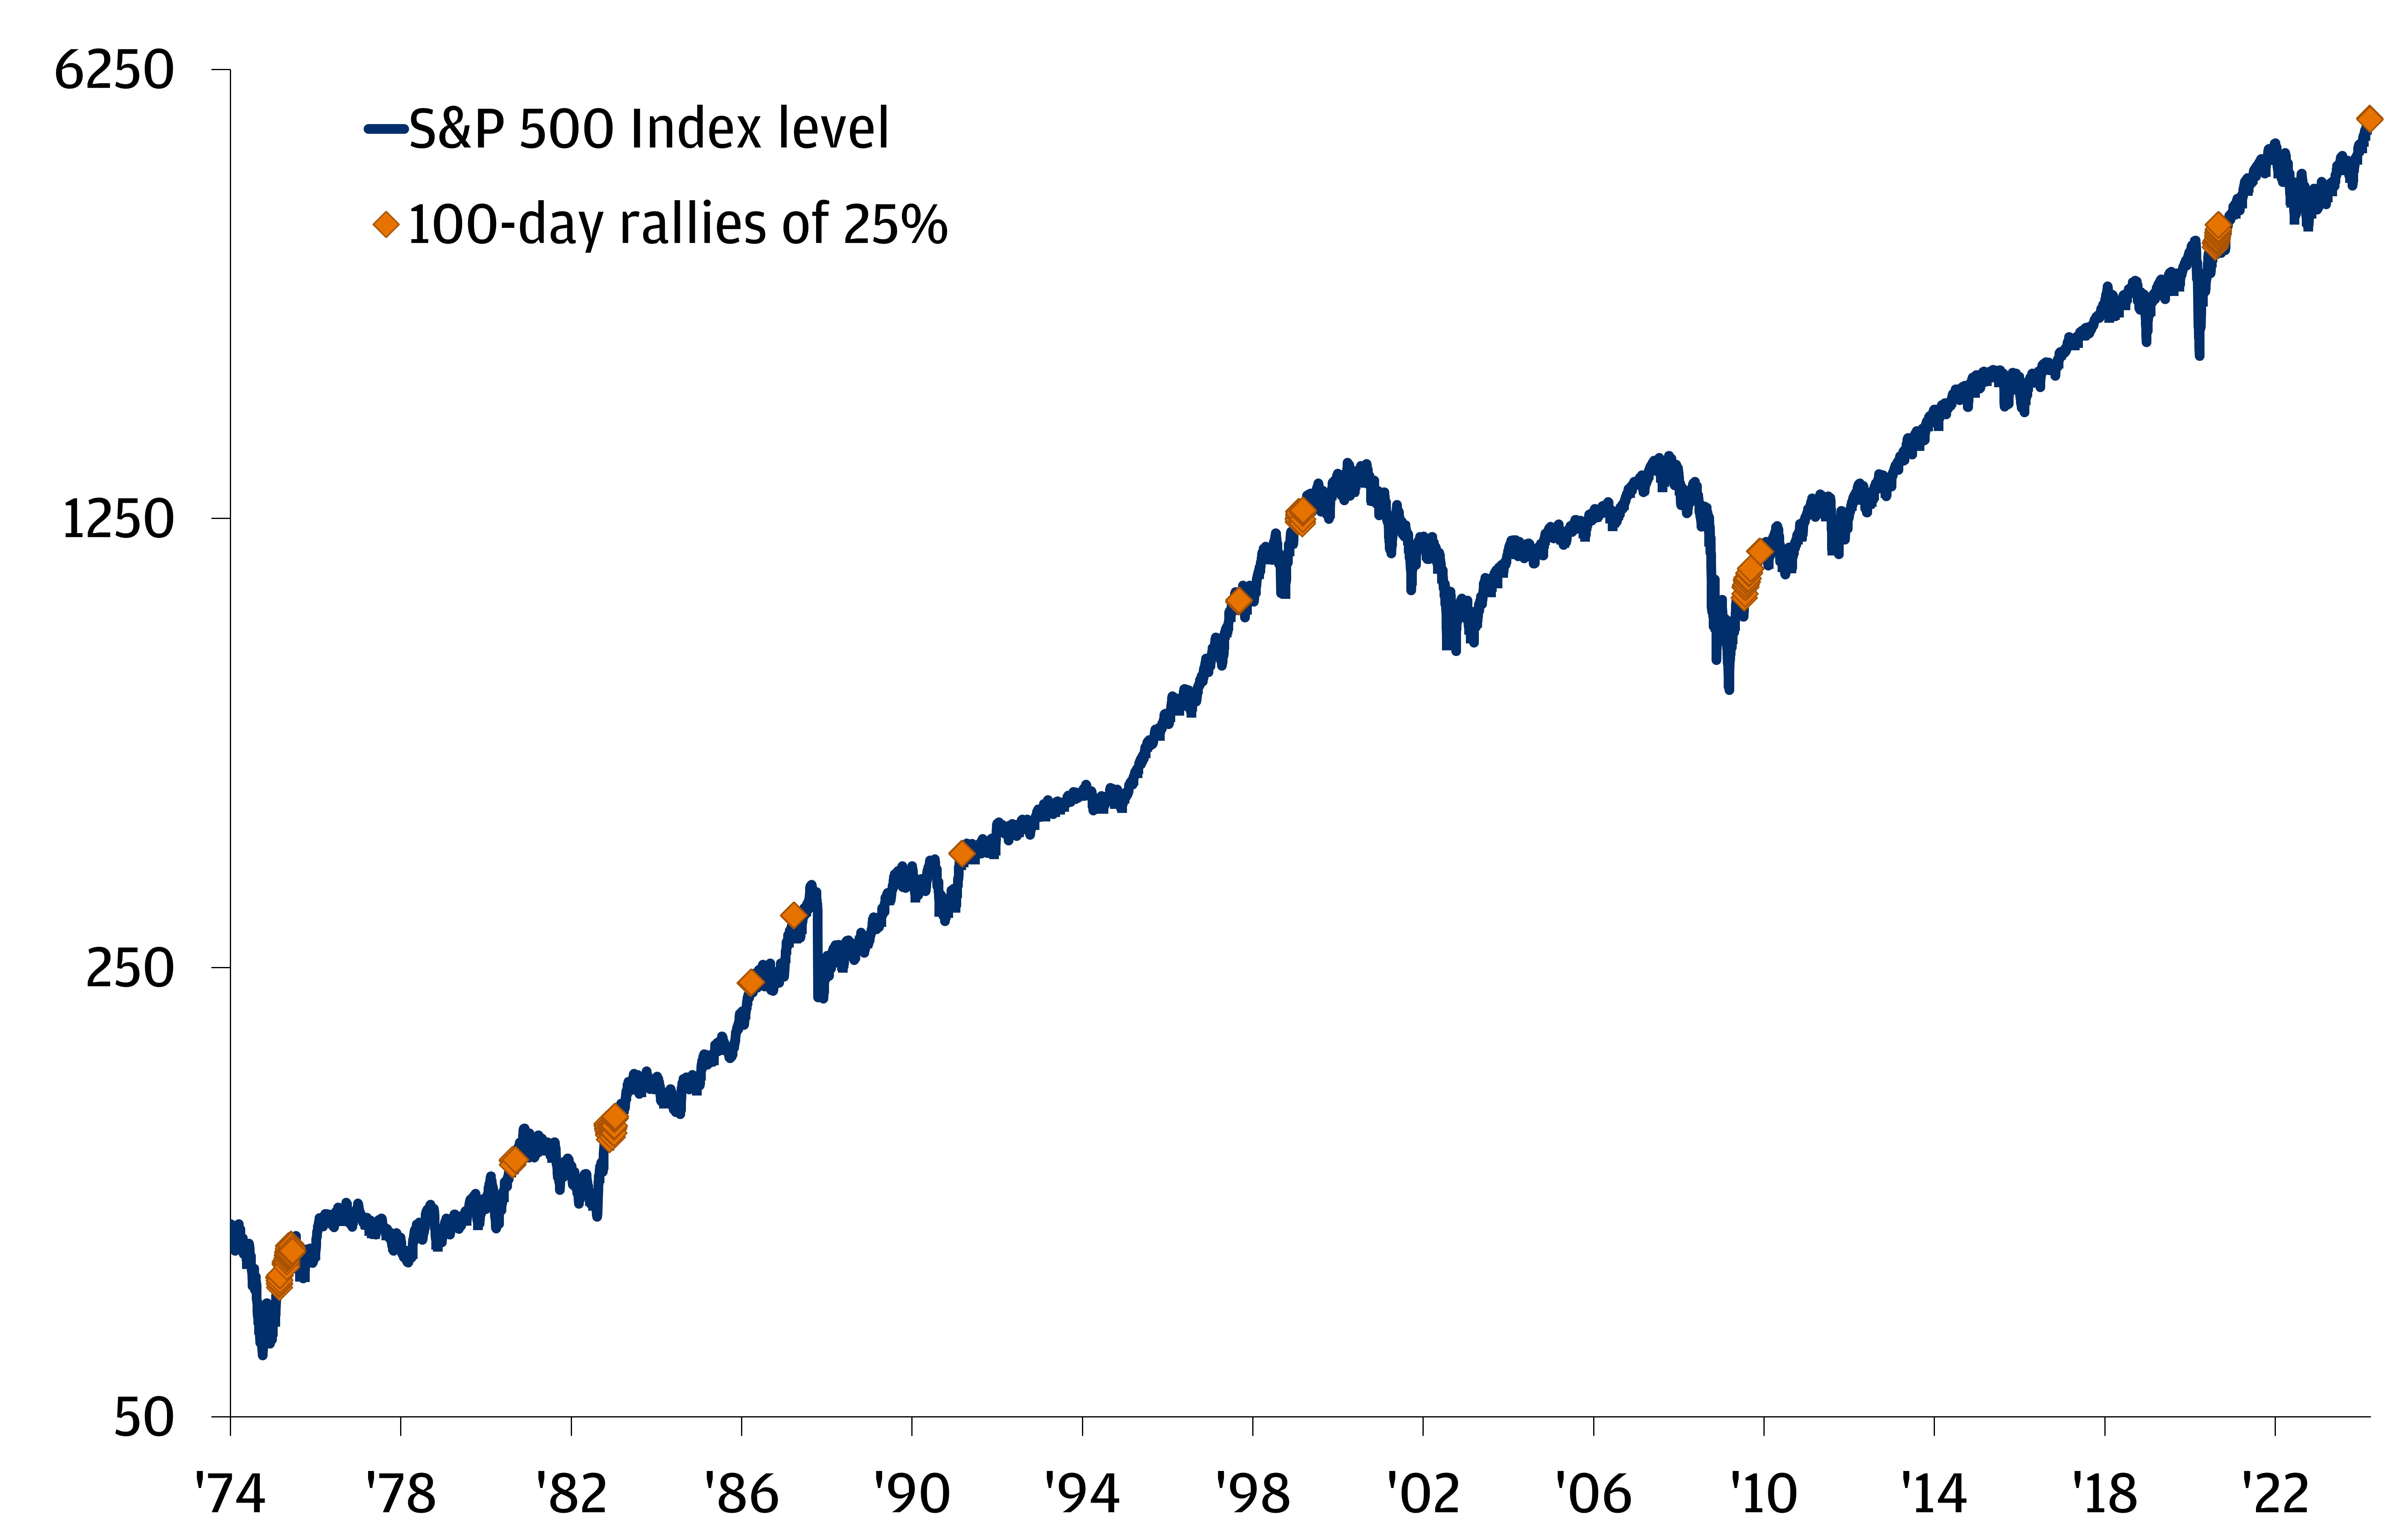 This chart shows the price of the S&P 500 Index and 100-day periods during which stocks rallied 25% or more.